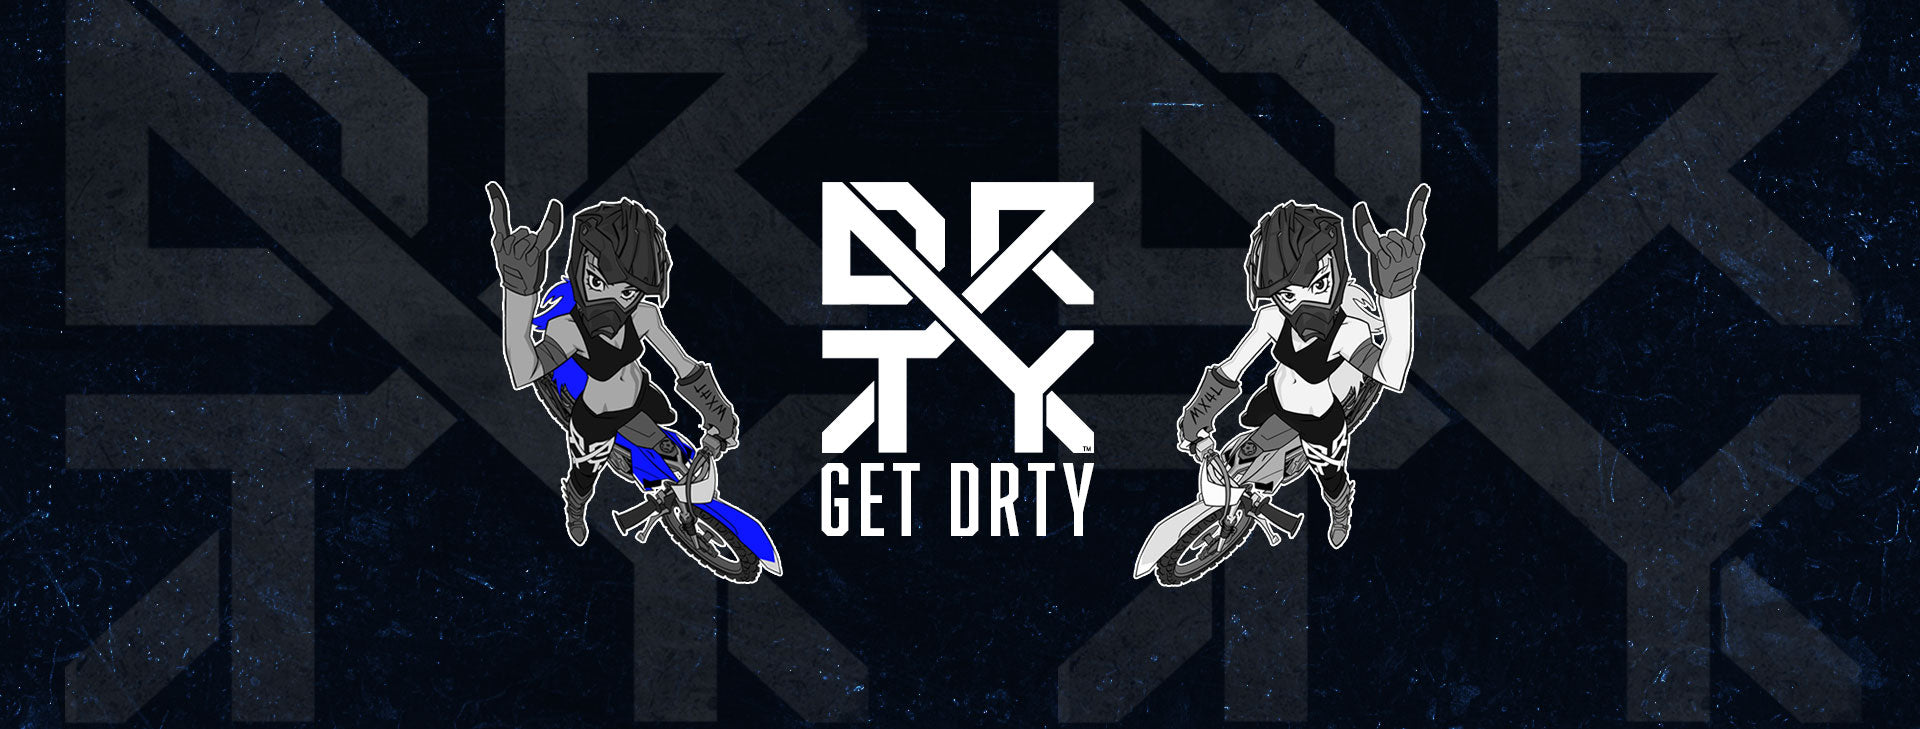 DRTYX Offroad Clothing banner with two motocross girls sitting on dirt bikes with the DRTY X Logo between them.